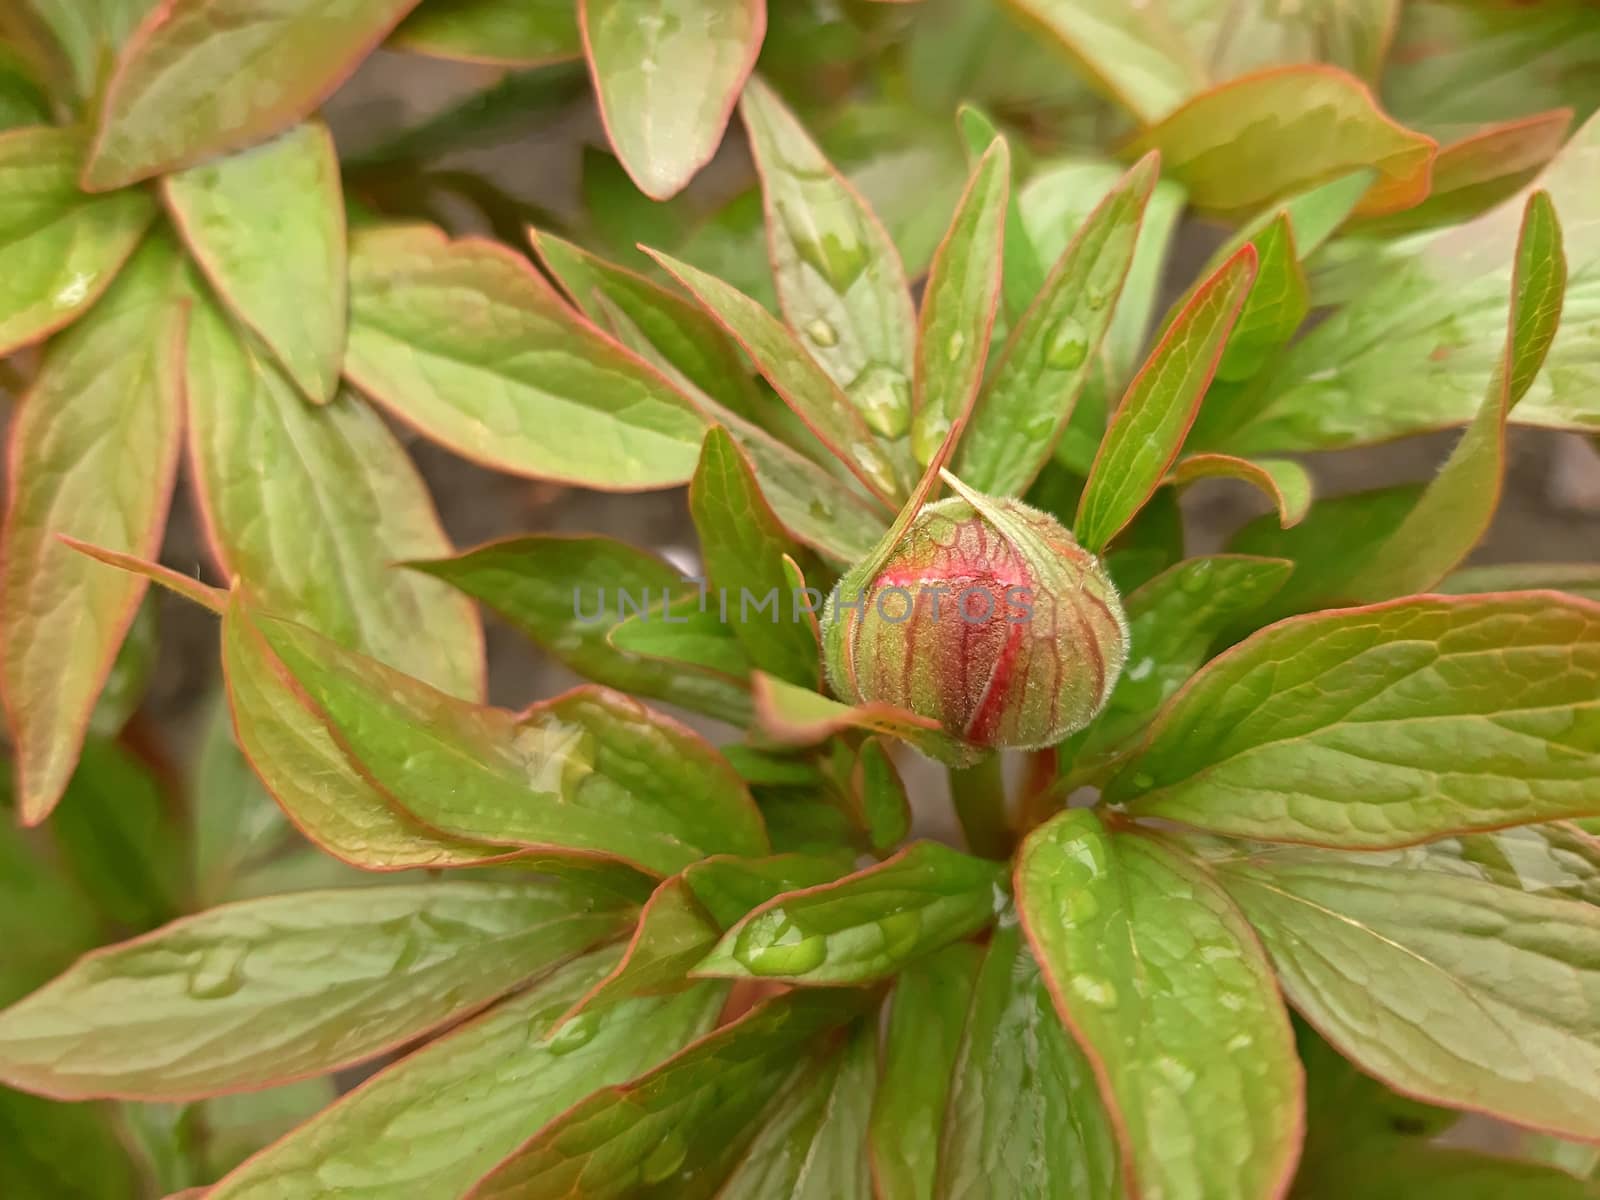 Peonies flower buds in the summer time by Mindru